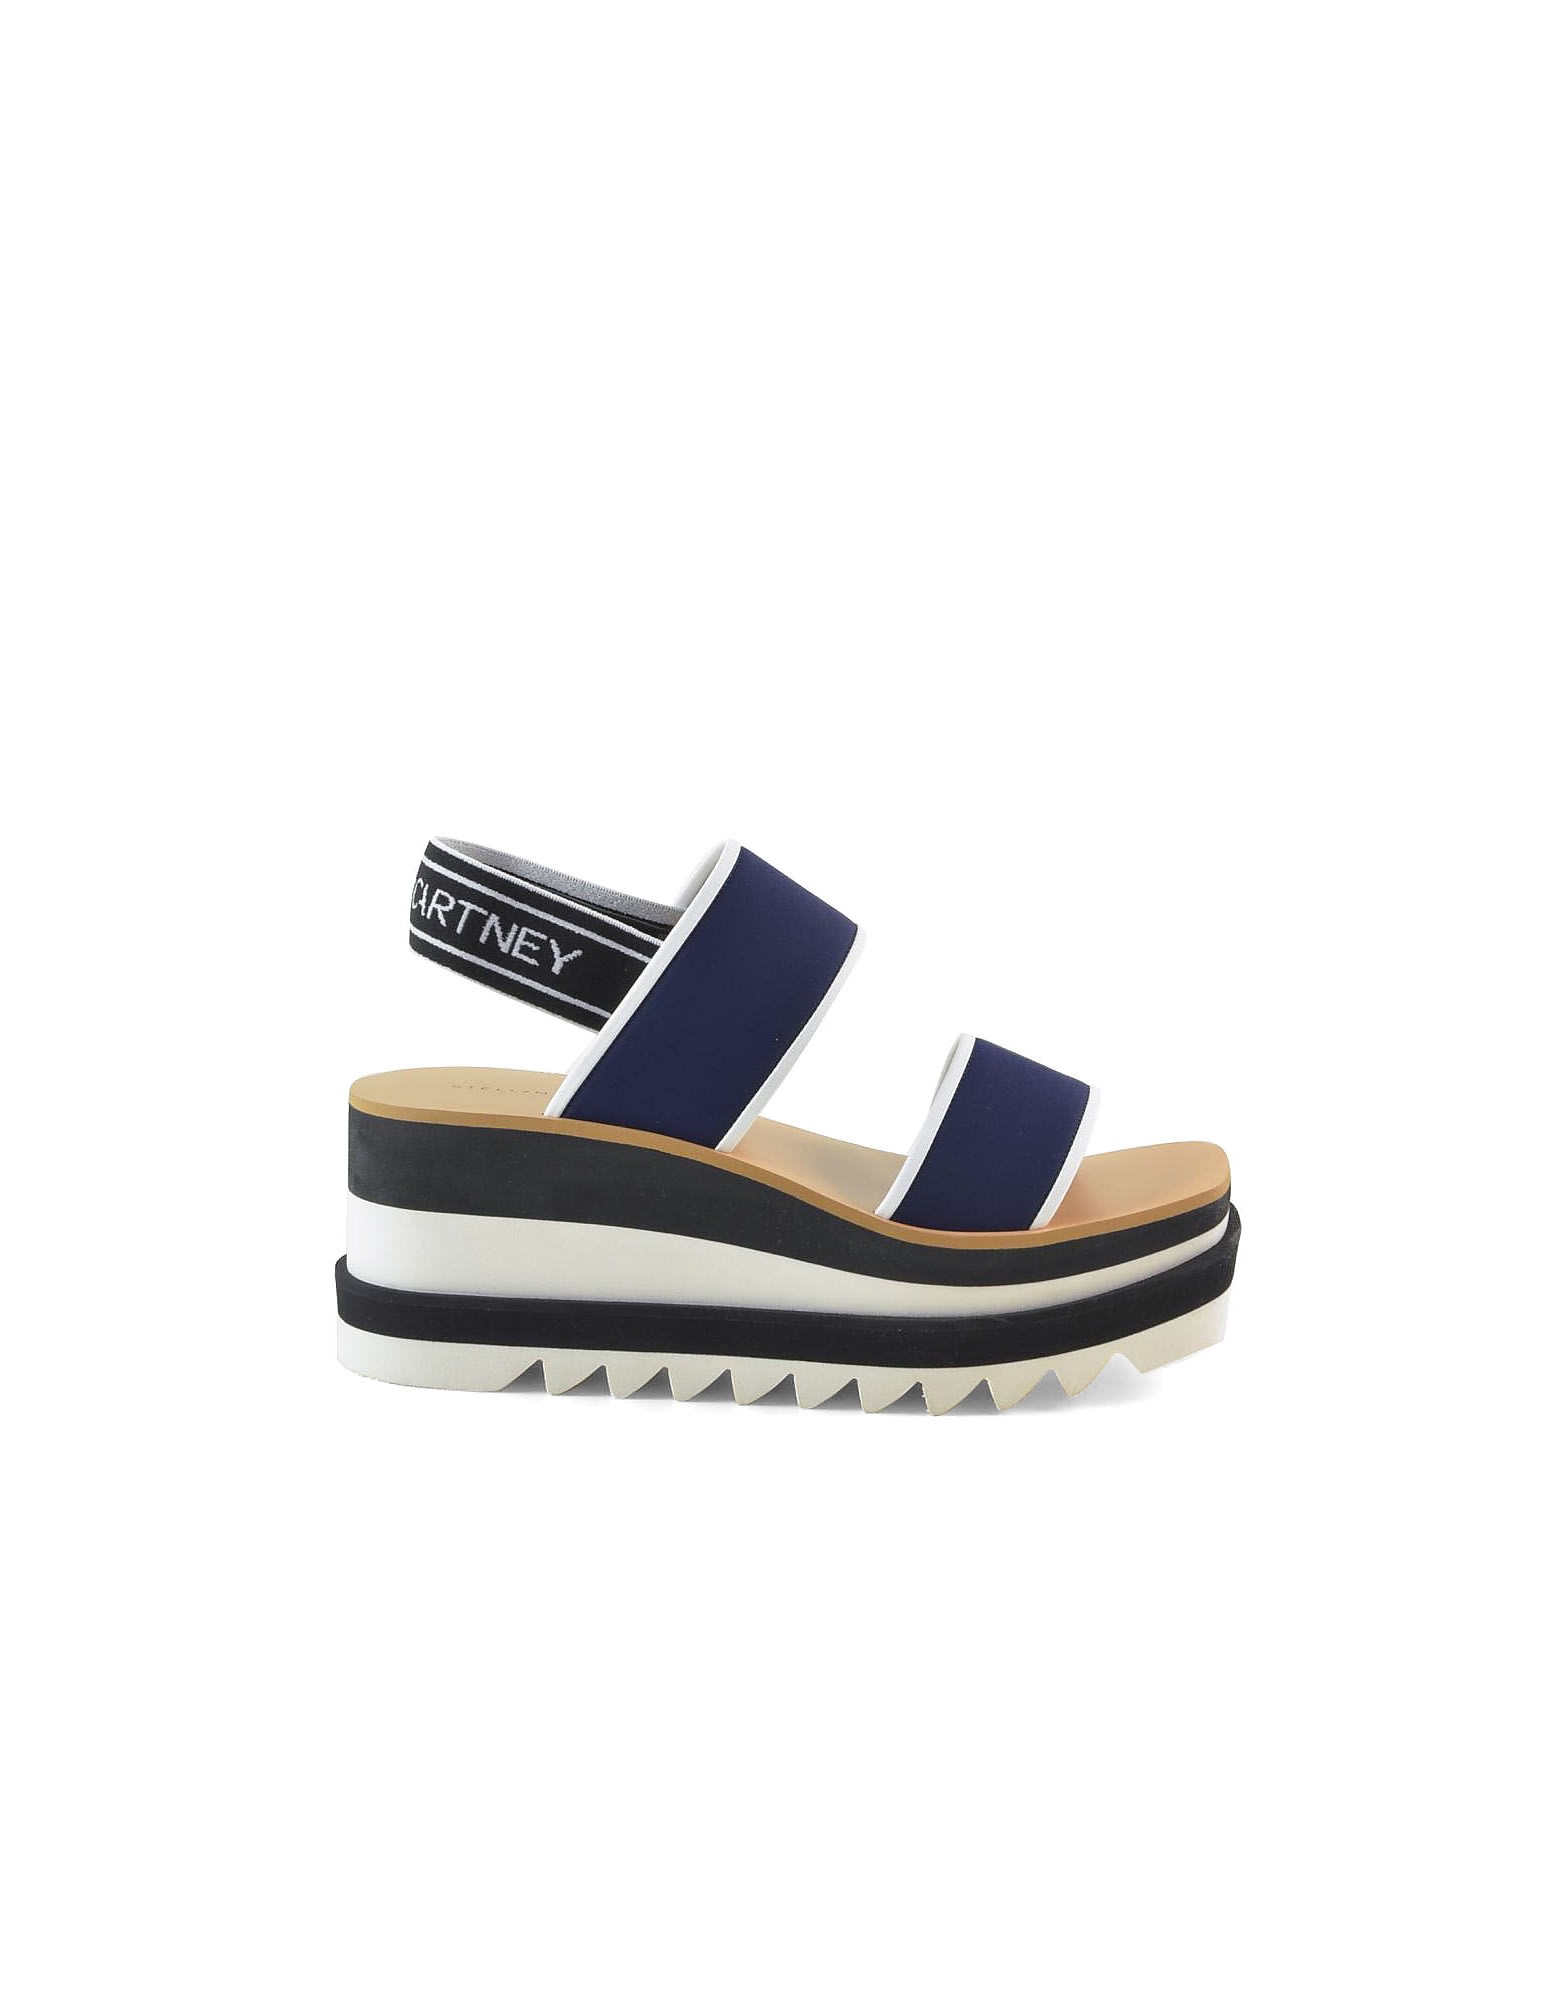 Buy Stella Mccartney Blue & White Striped Wedge Sandals online, shop Stella McCartney shoes with free shipping